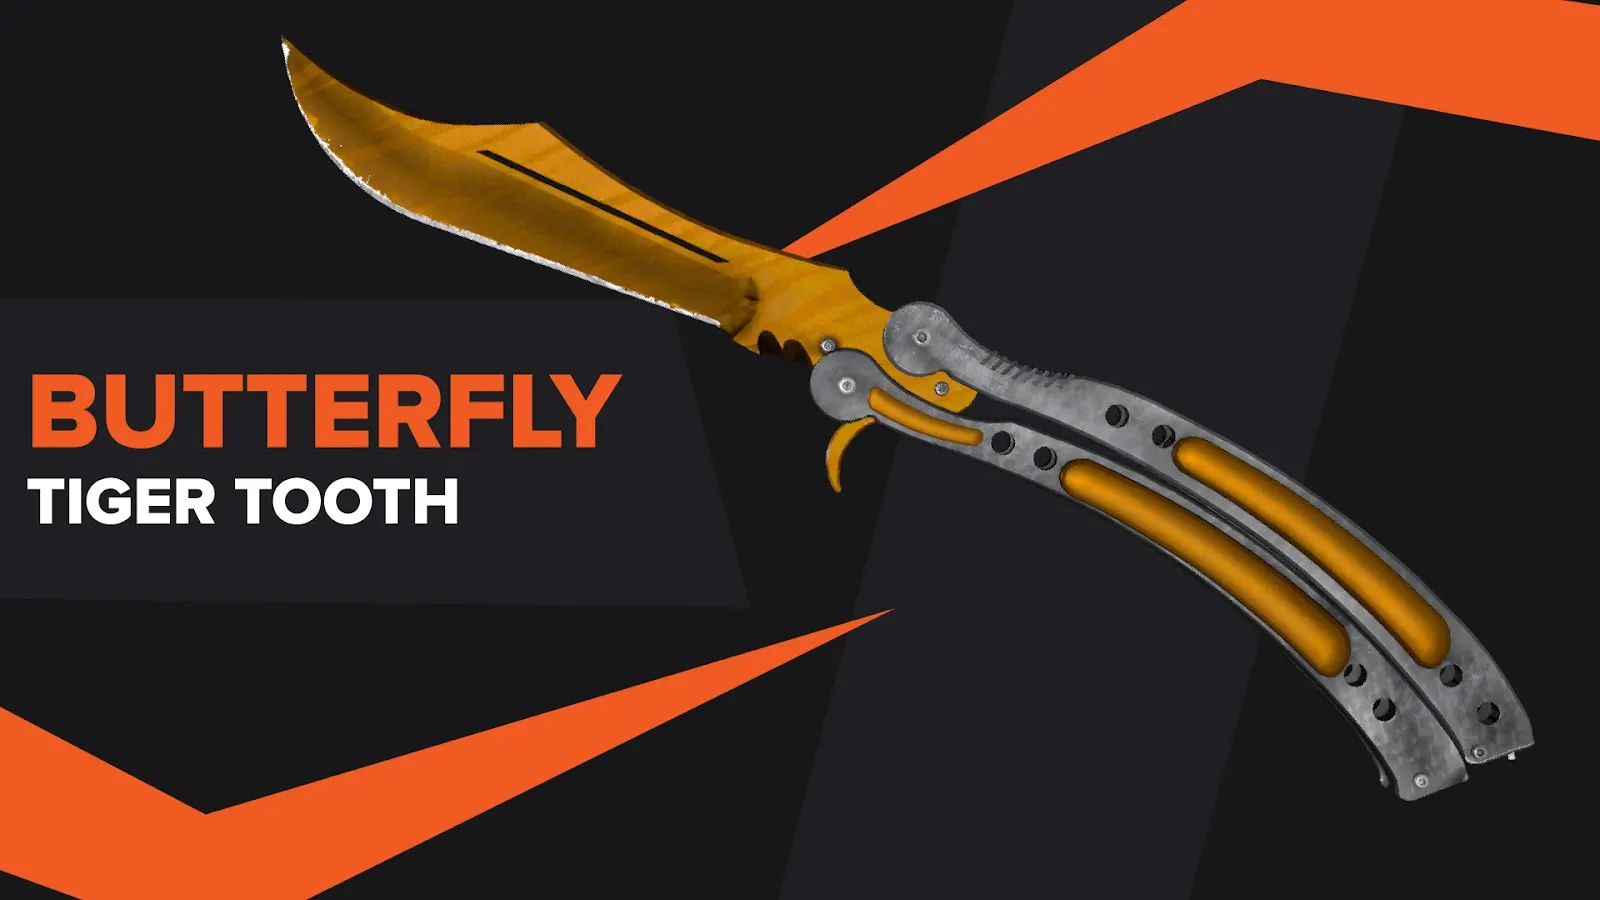 Most Expensive CSGO Skins - Tiger Tooth Butterfly Knife